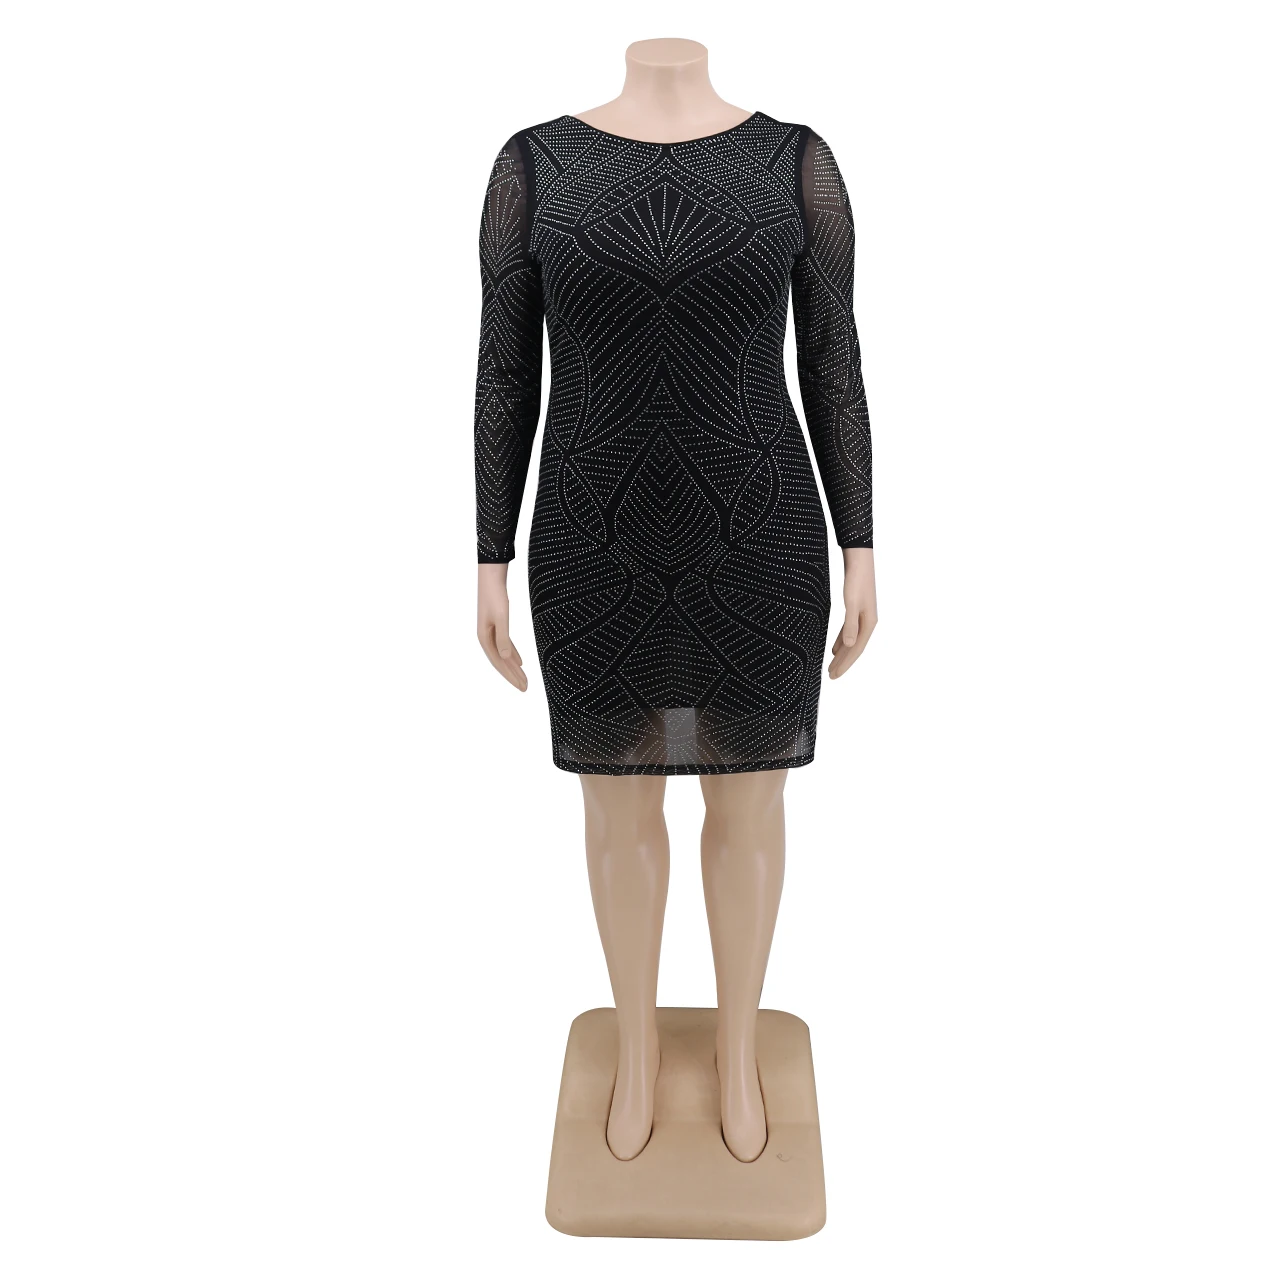 Foma YF1288 plus size xl-5xl autumn winter sexy casual women's Hot selling black polyester mesh hot drill buttock waist dress